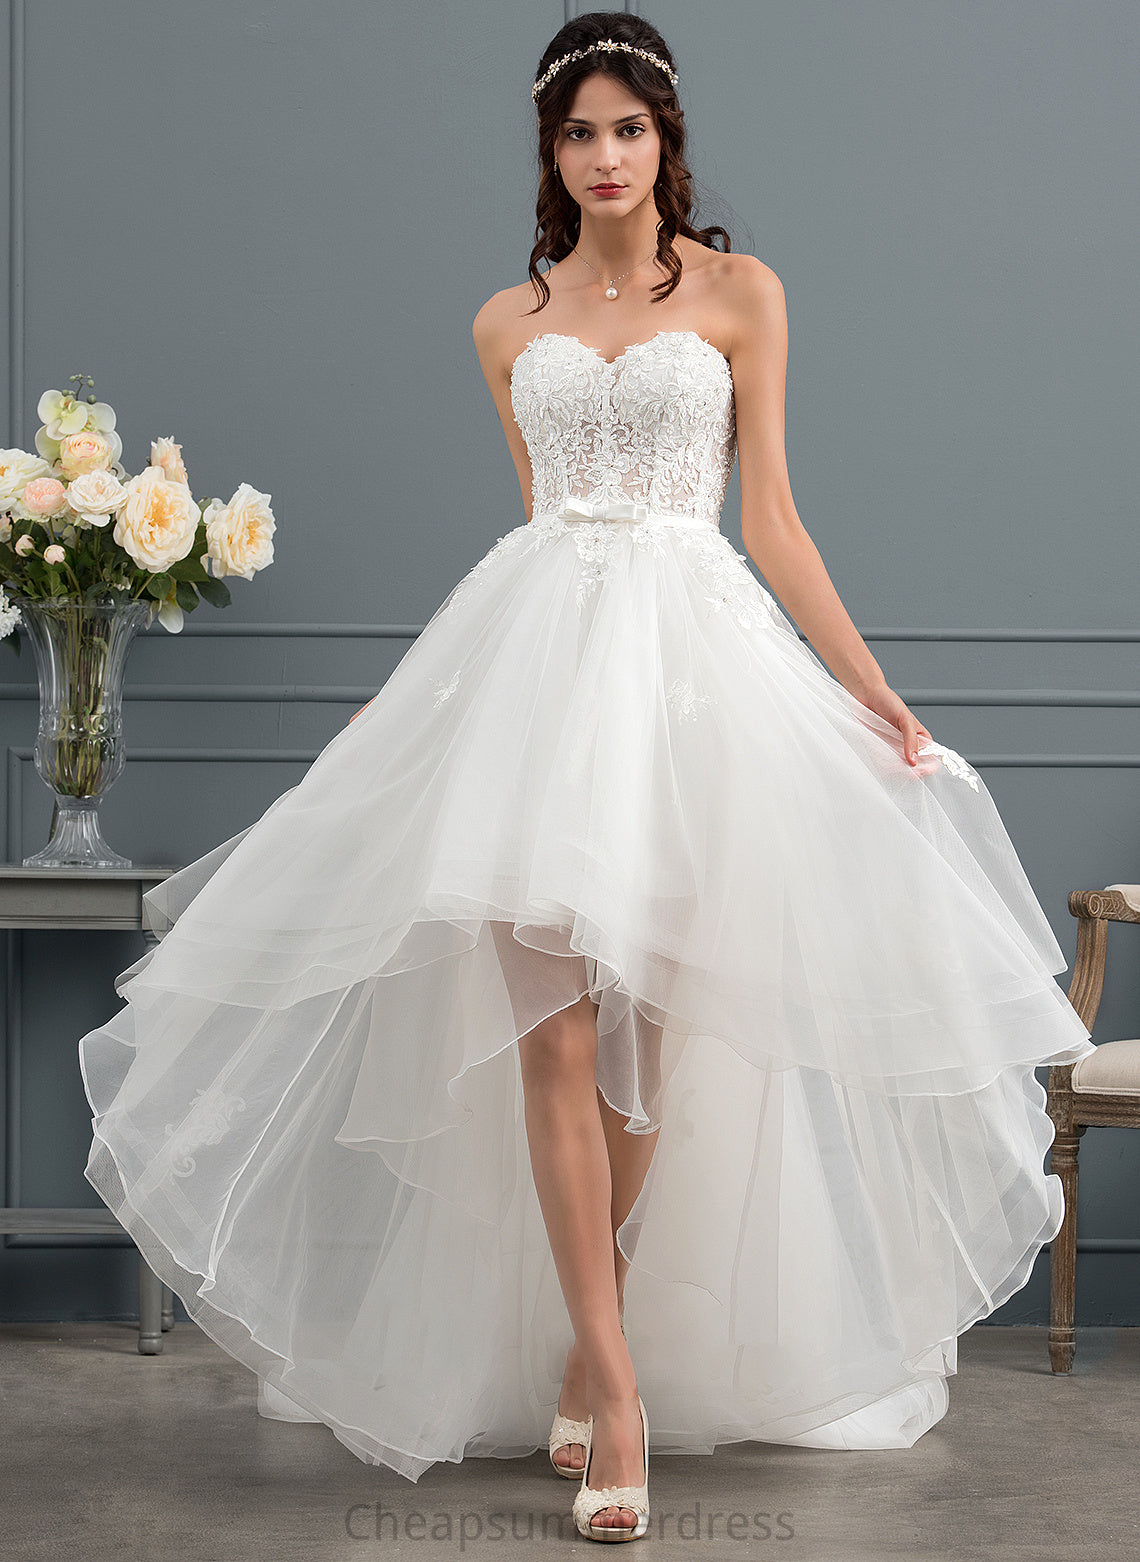 Tulle Bow(s) Janae Beading Wedding Dresses Dress Asymmetrical With Sweetheart A-Line Wedding Sequins